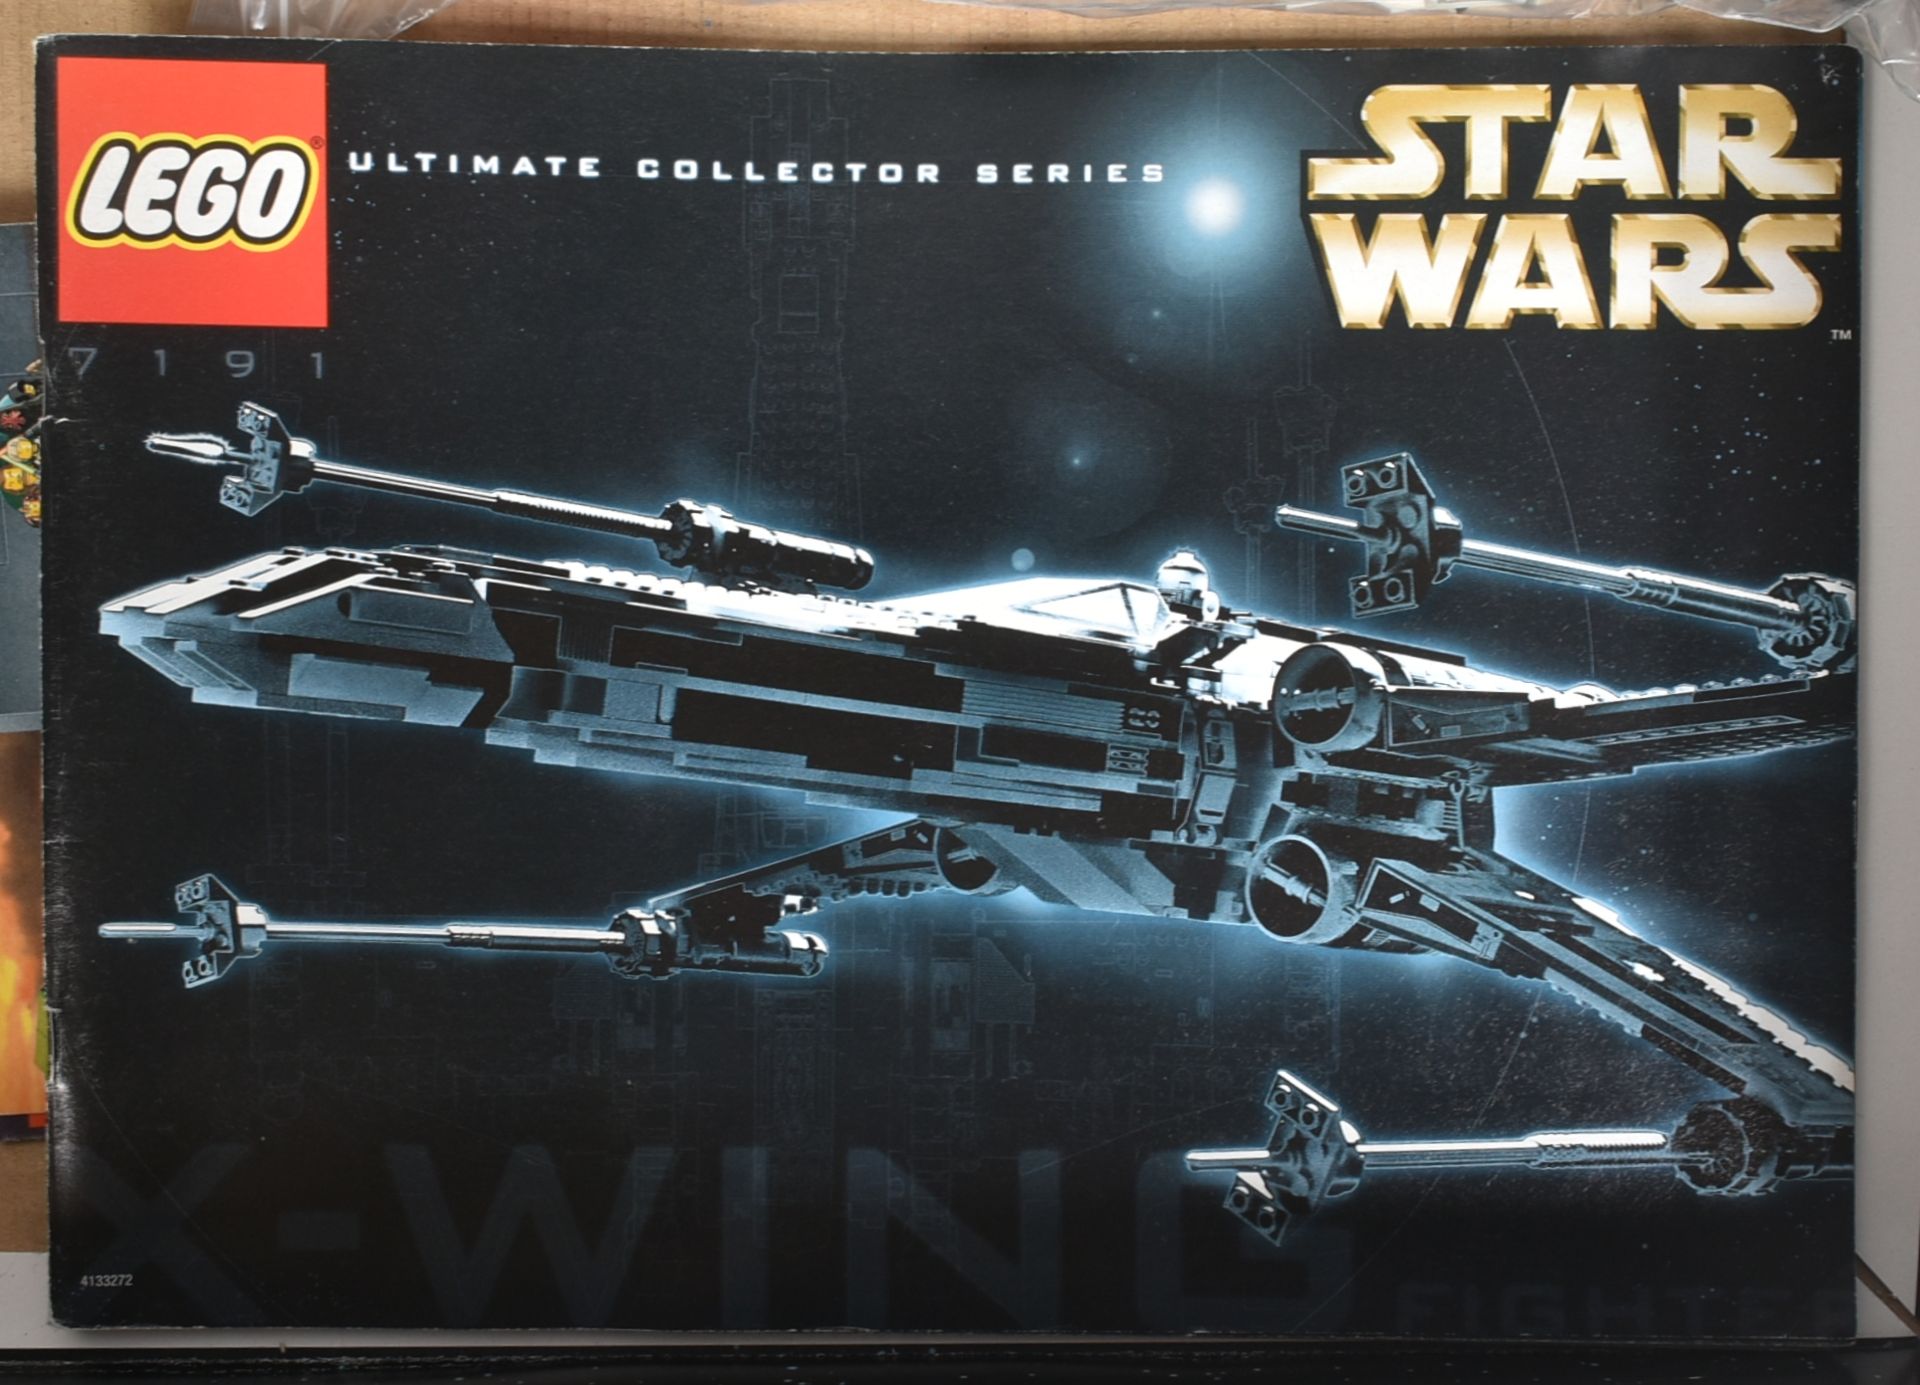 LEGO - STAR WARS - 7191 - X-WING FIGHTER - Image 6 of 6